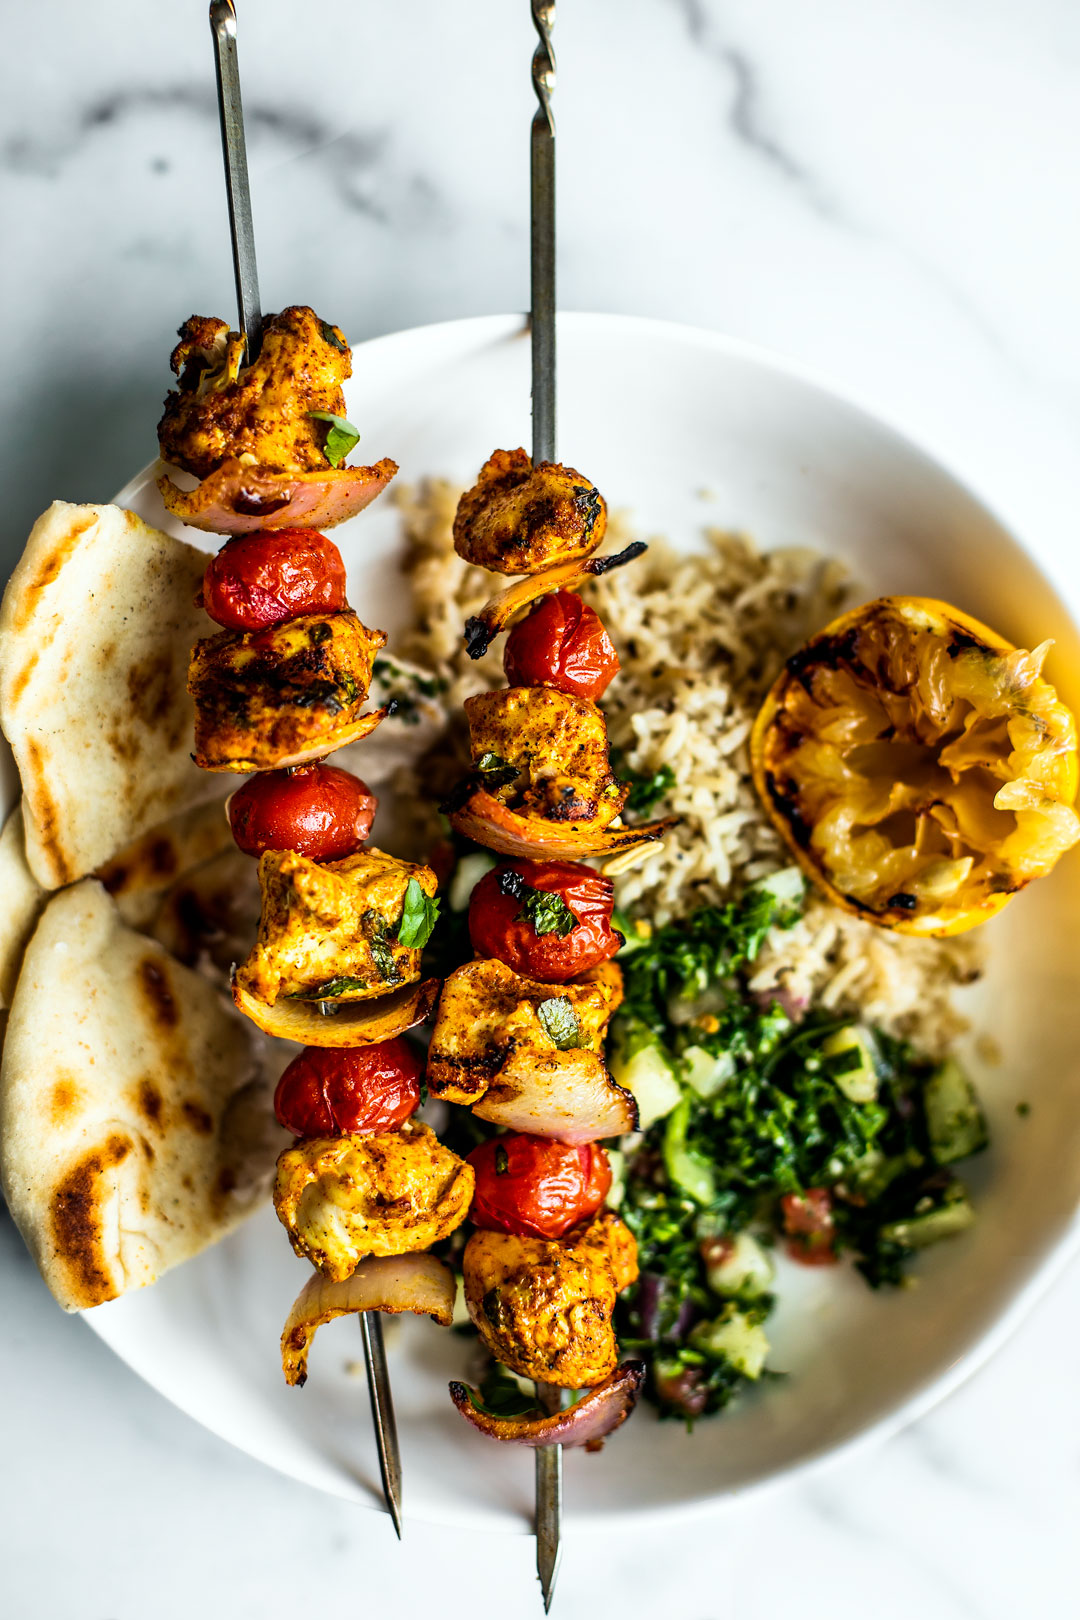 Weekly meal plan 225: Grilled Moroccan Skewers at Killing Thyme 